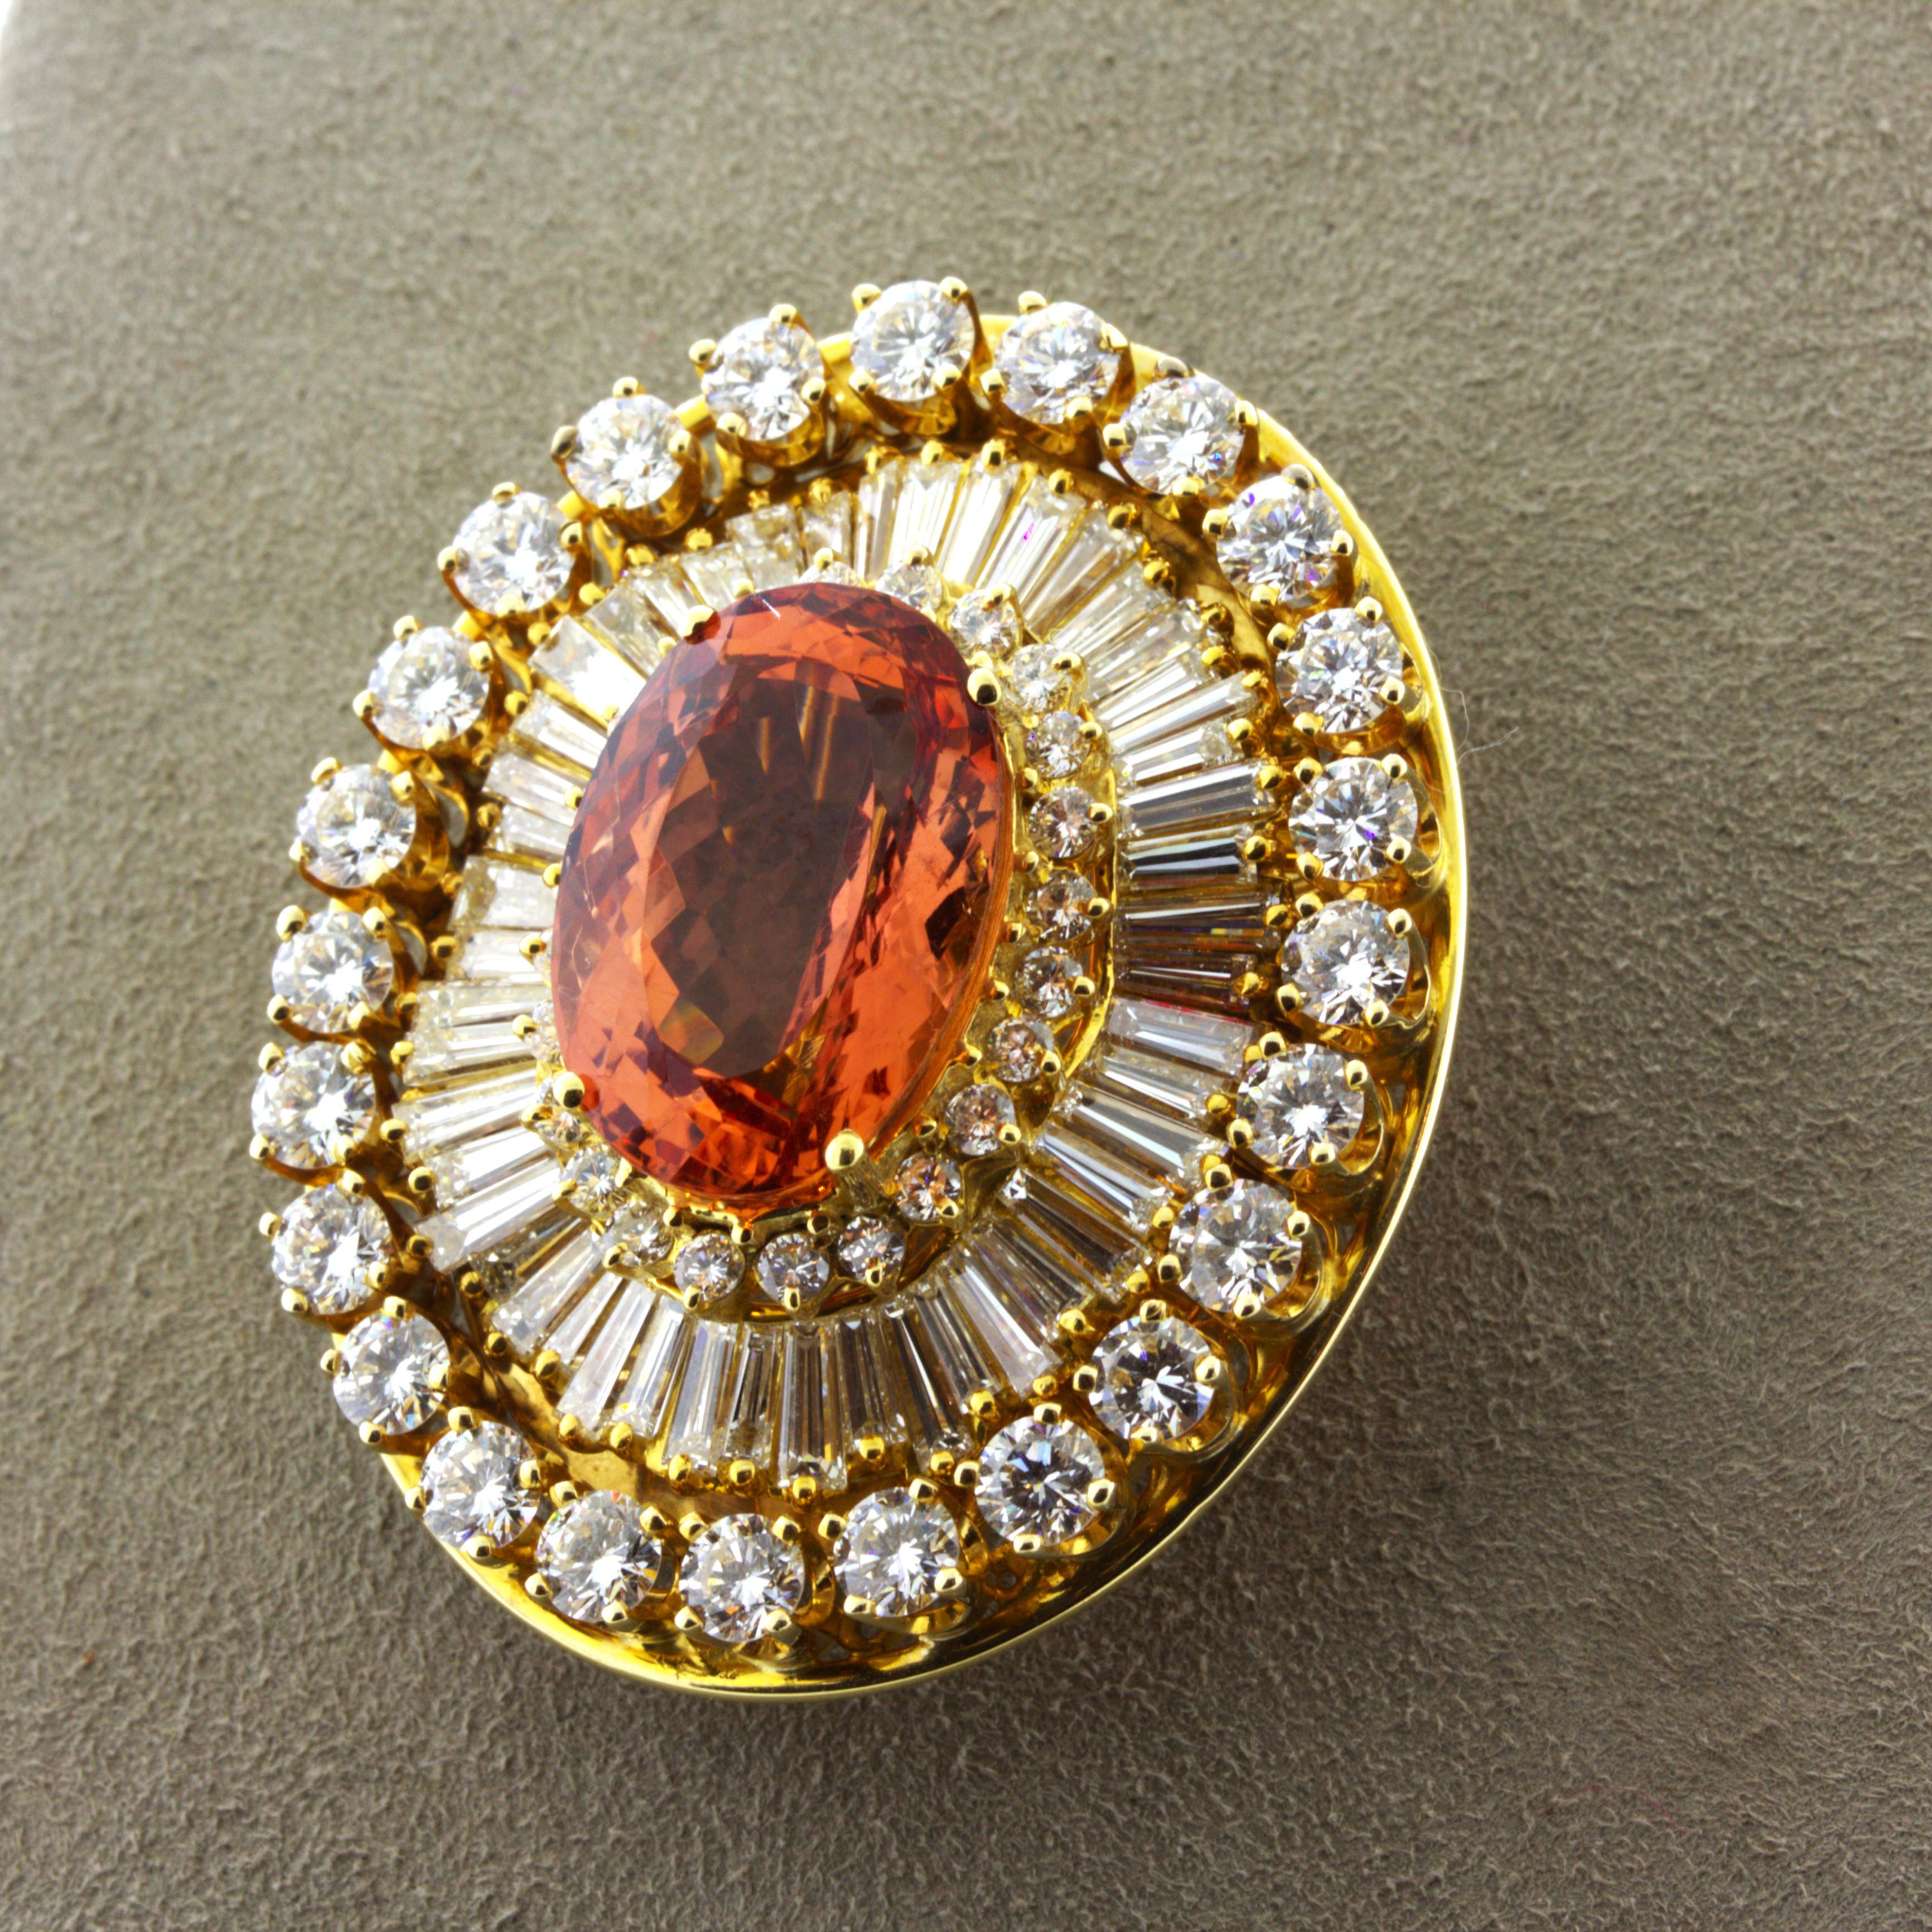 Superb Imperial Topaz Diamond 18K Yellow Gold Brooch, AGL Certified In New Condition For Sale In Beverly Hills, CA